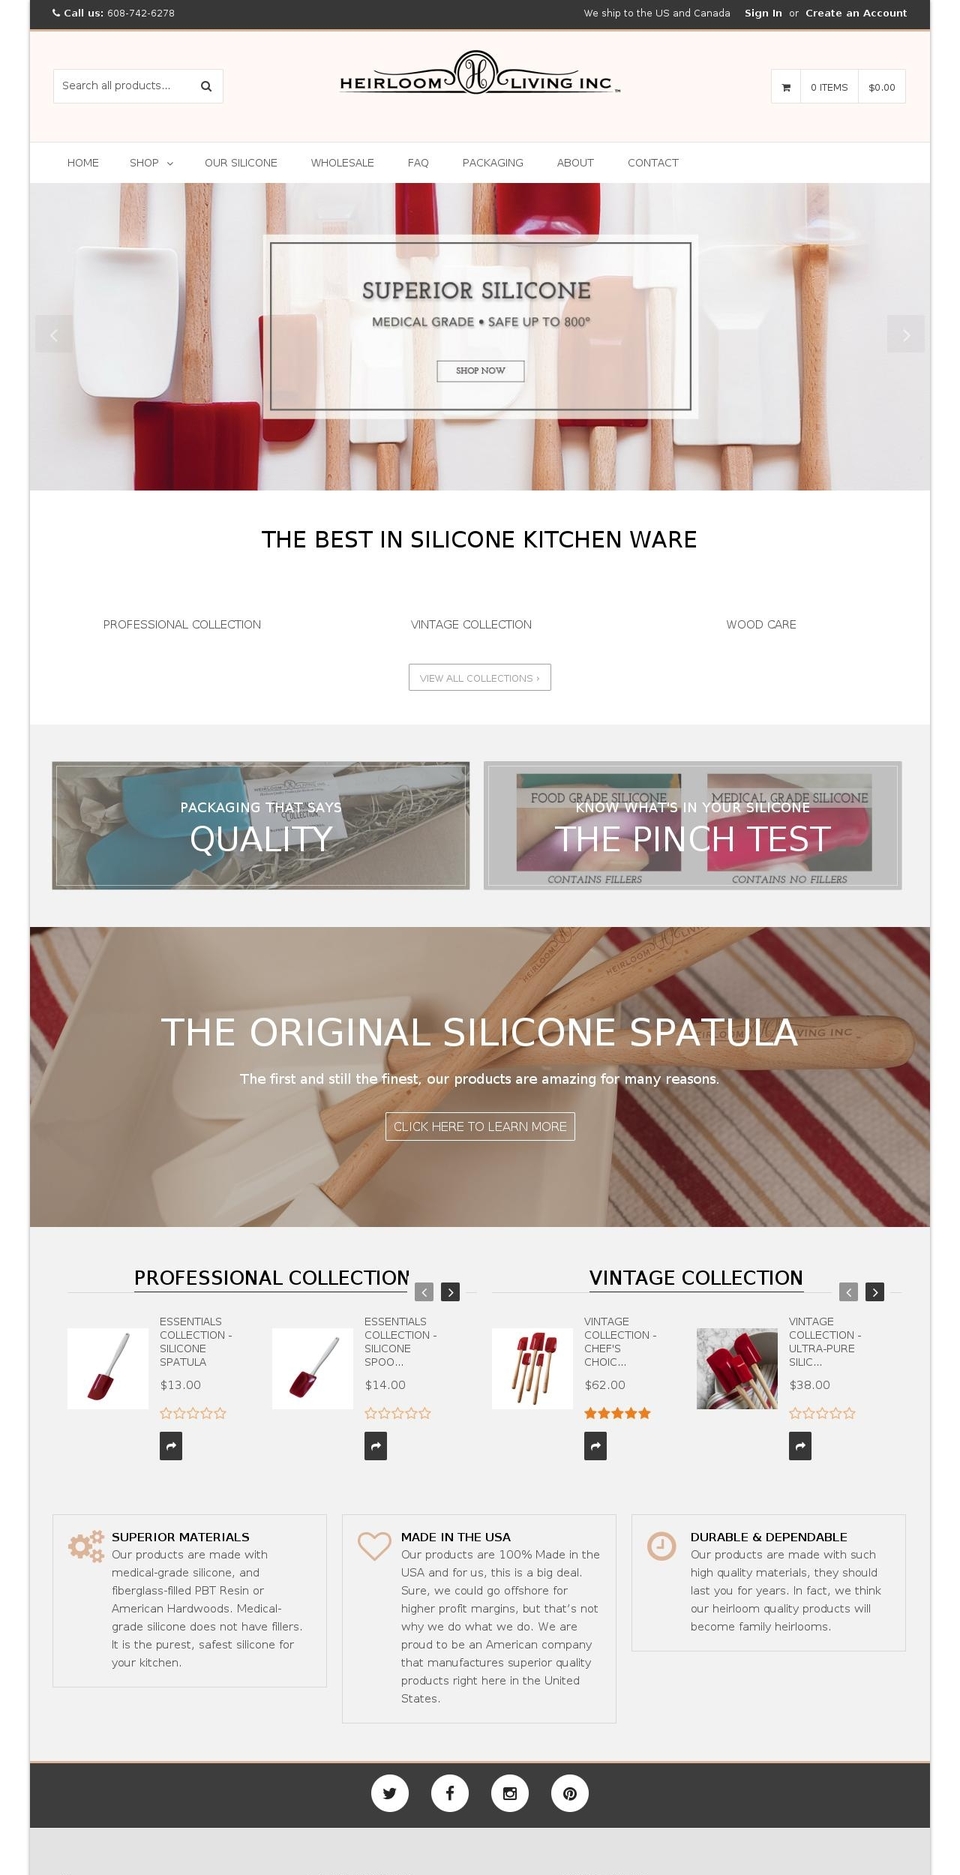 qrack Shopify theme site example heirloomliving.us